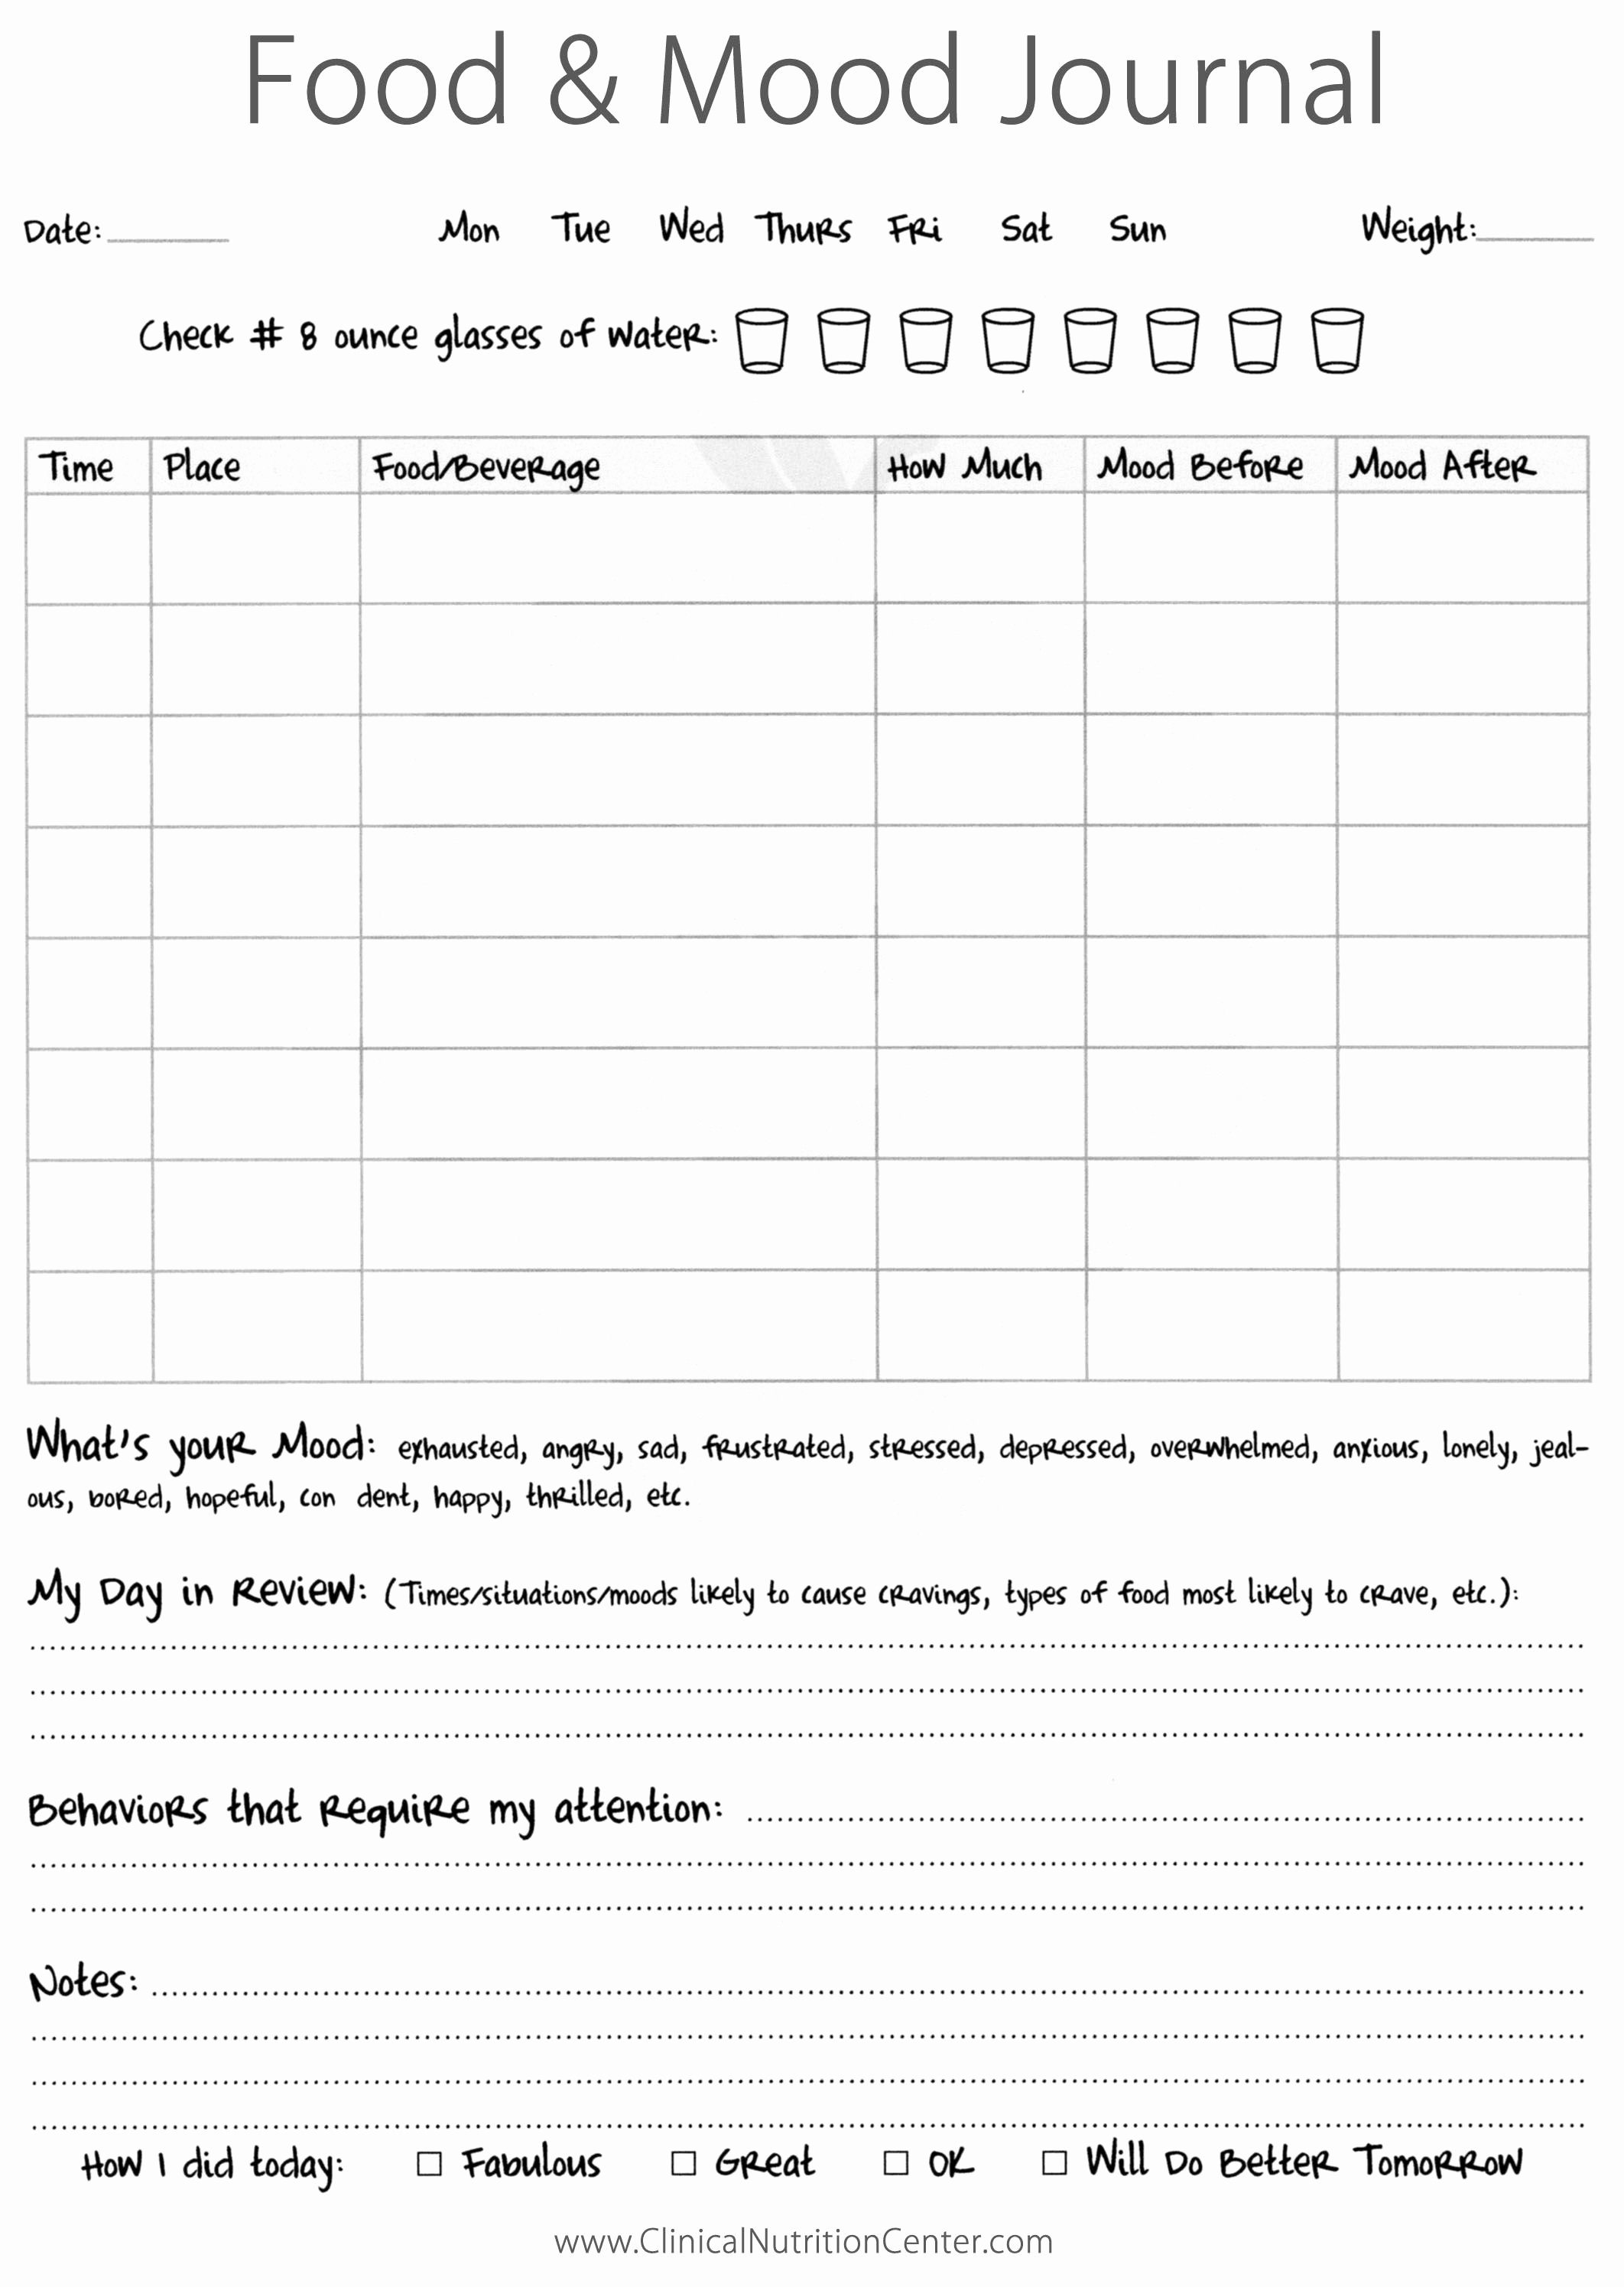 Free Printable Food Journal Awesome Printable Journal Pages to Track Food Water and the